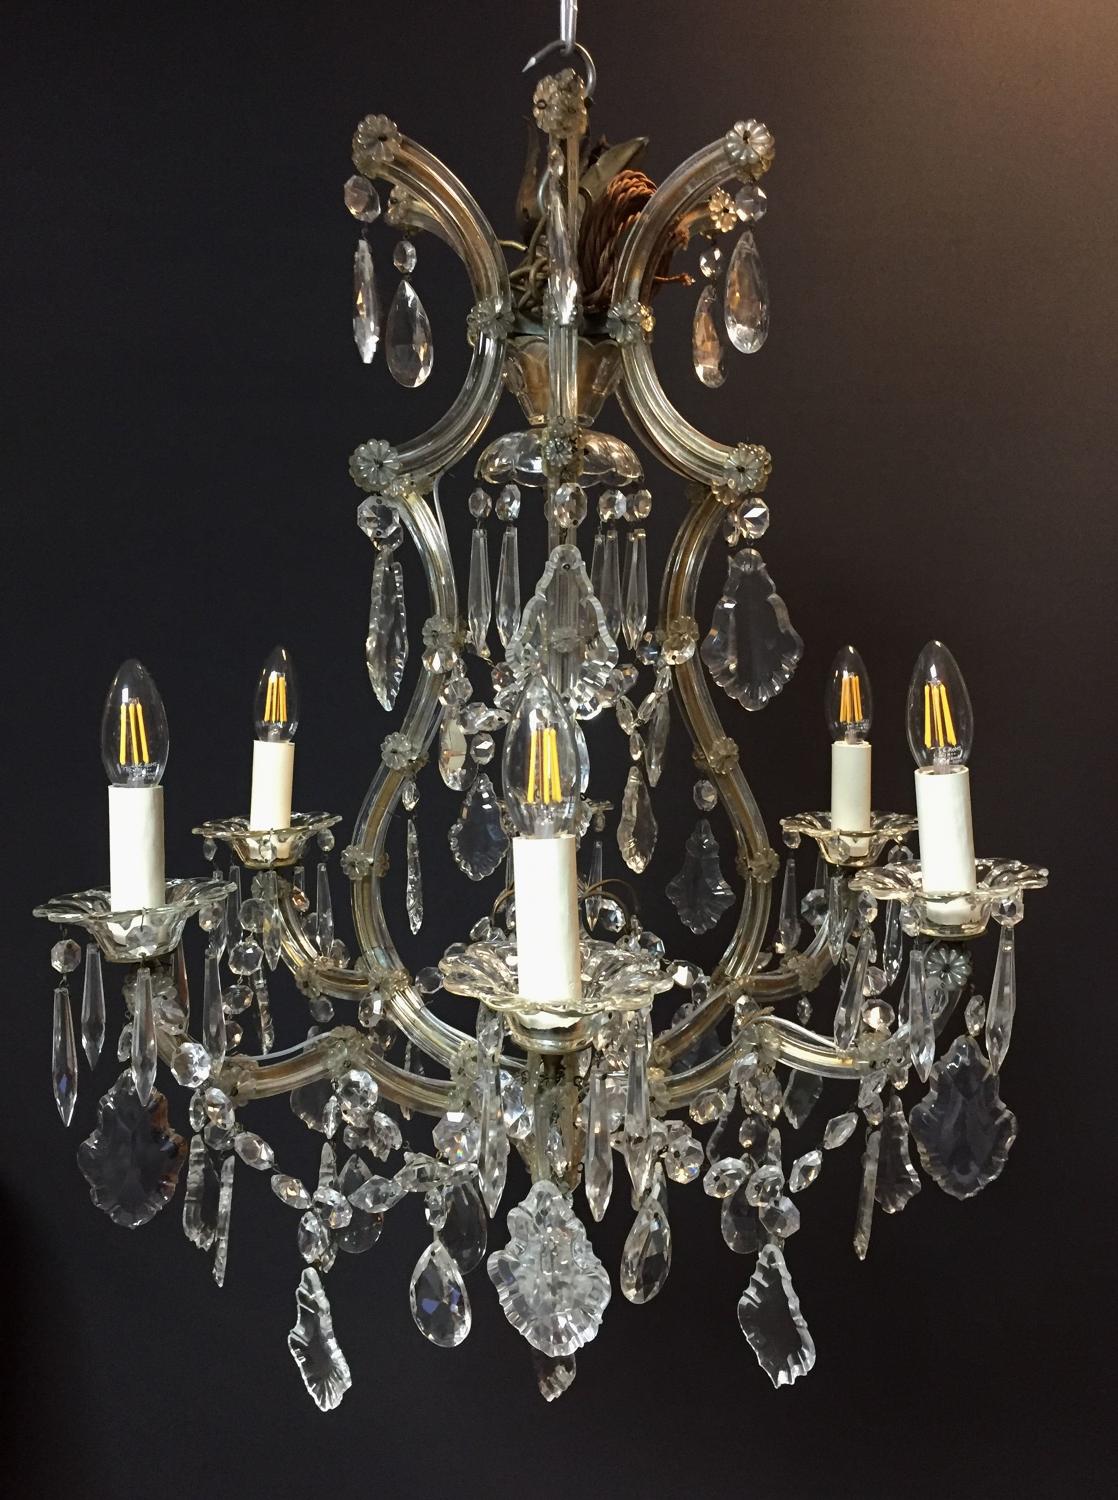 A Marie Therese style chandelier